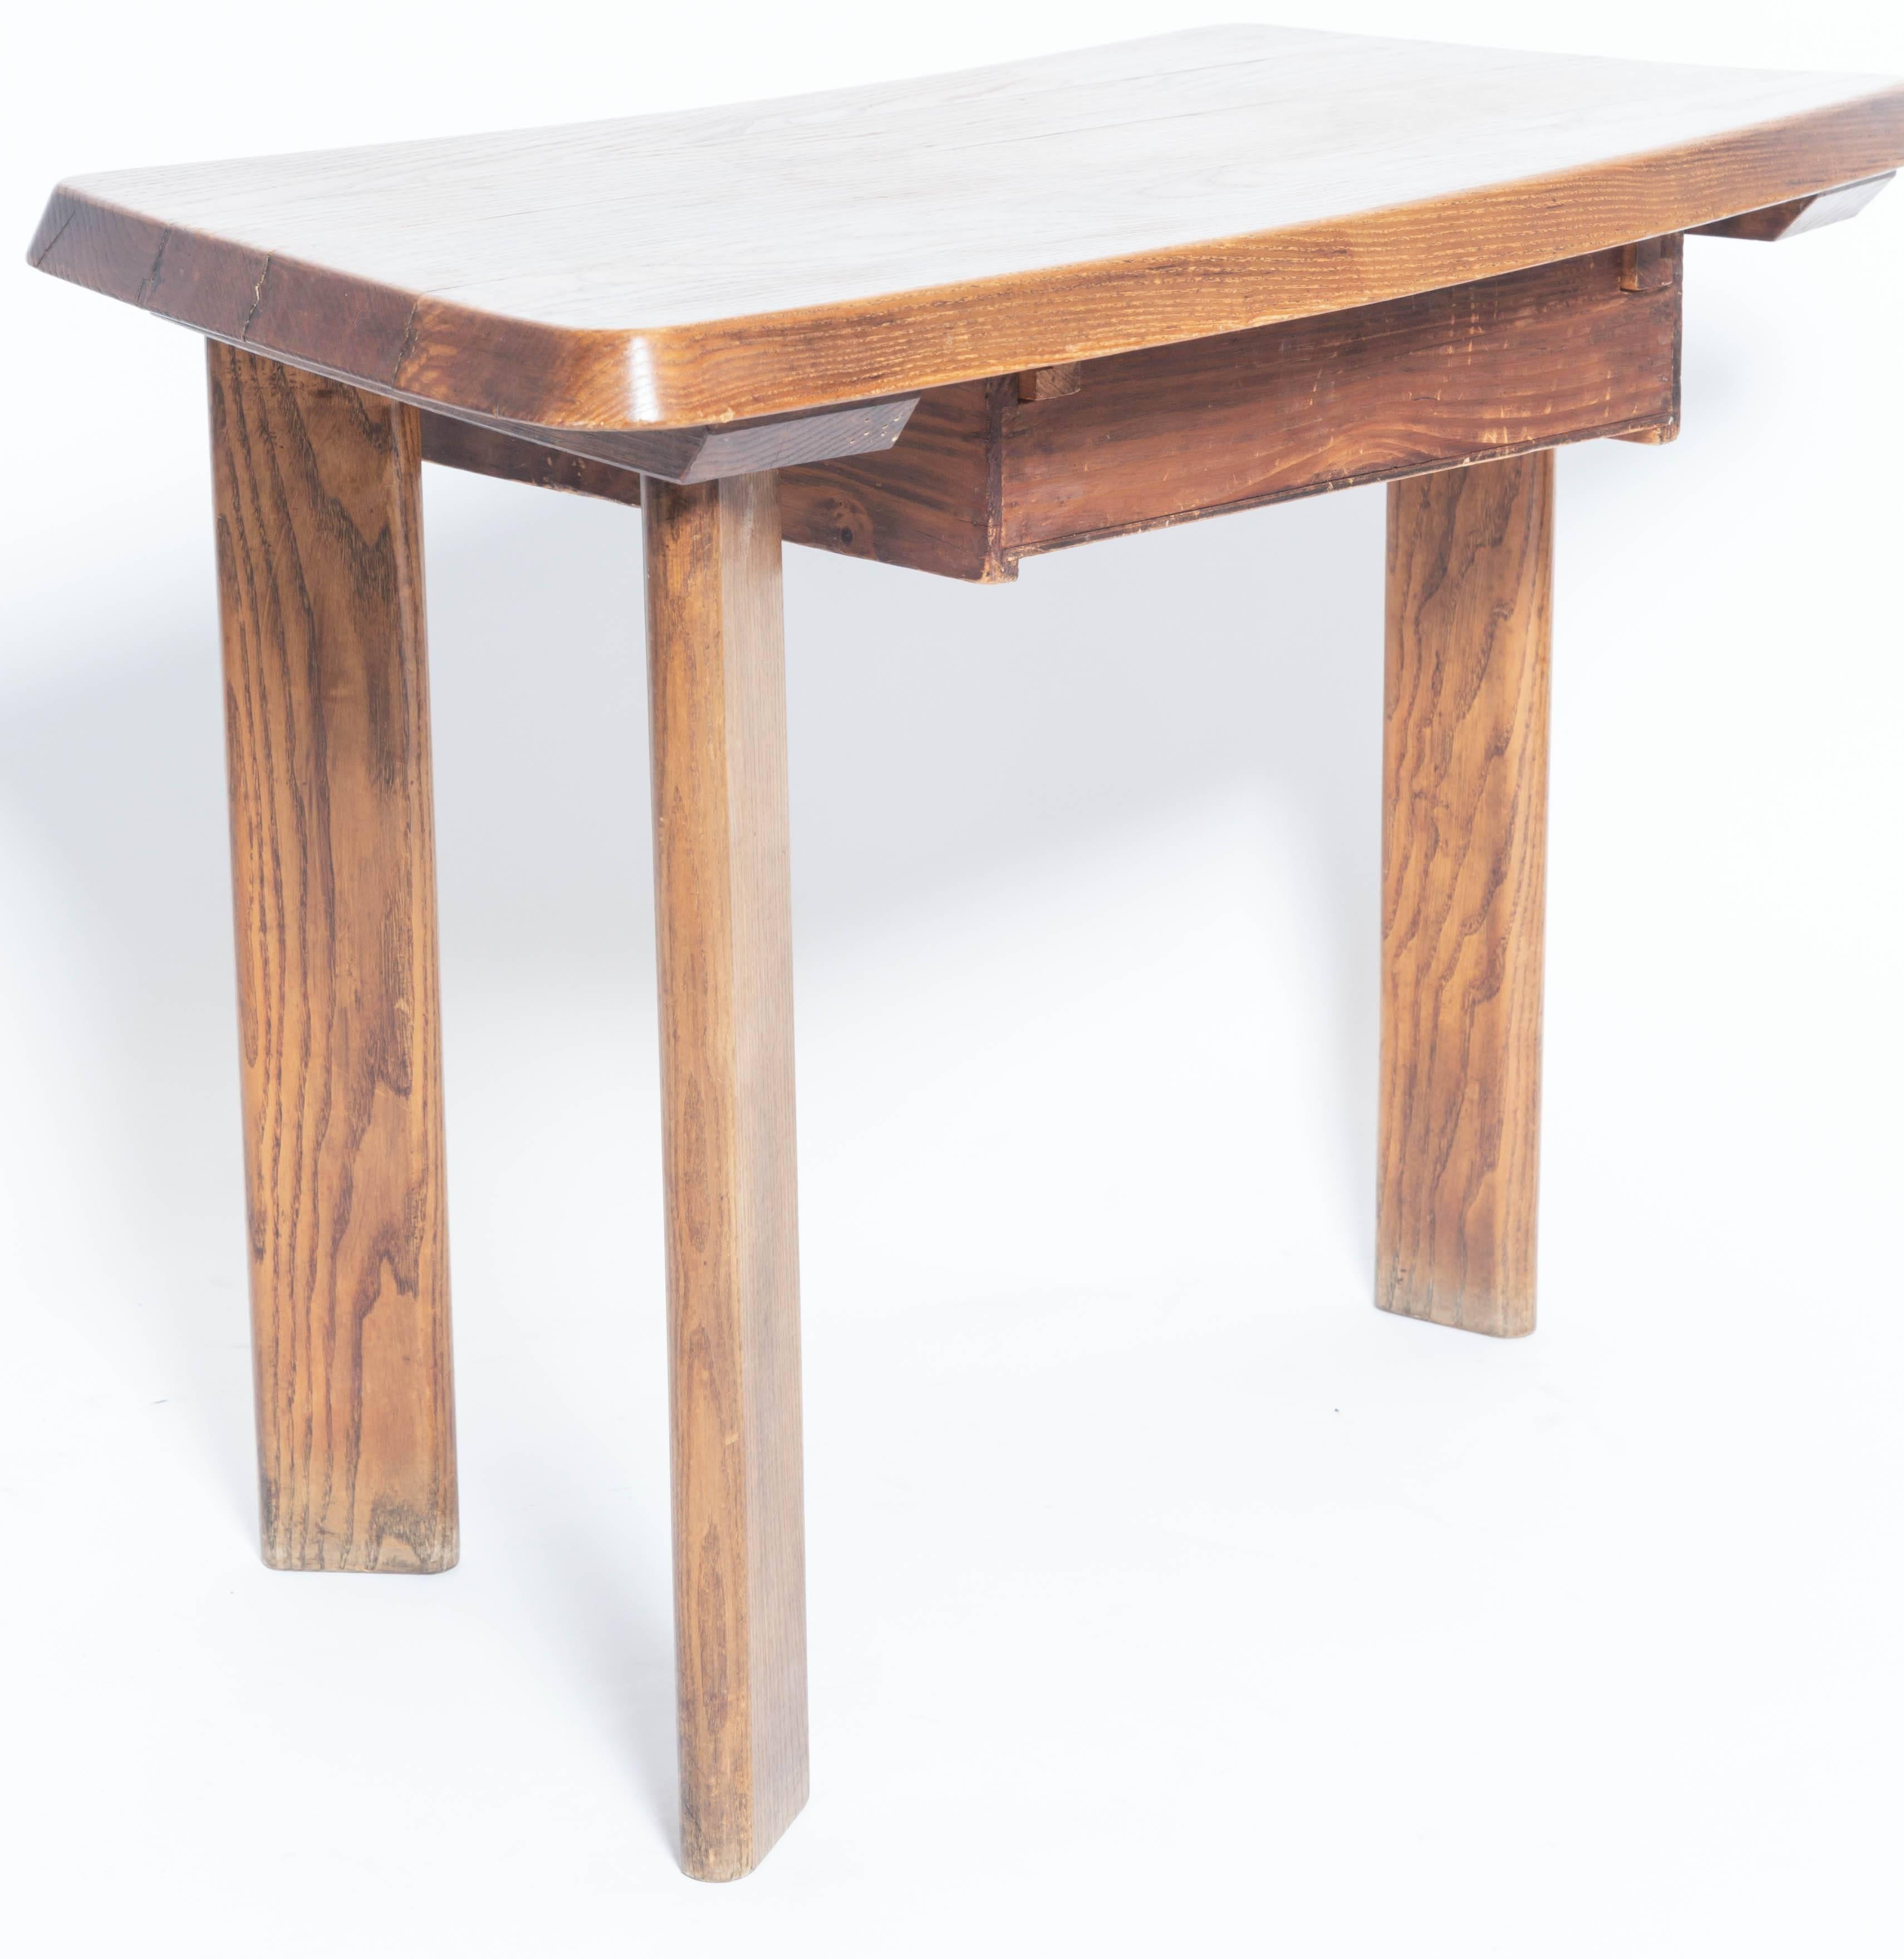 Mid-20th Century Three-Legged Wooden Oak Table with Drawer, in the Manner of Charlotte Perriand